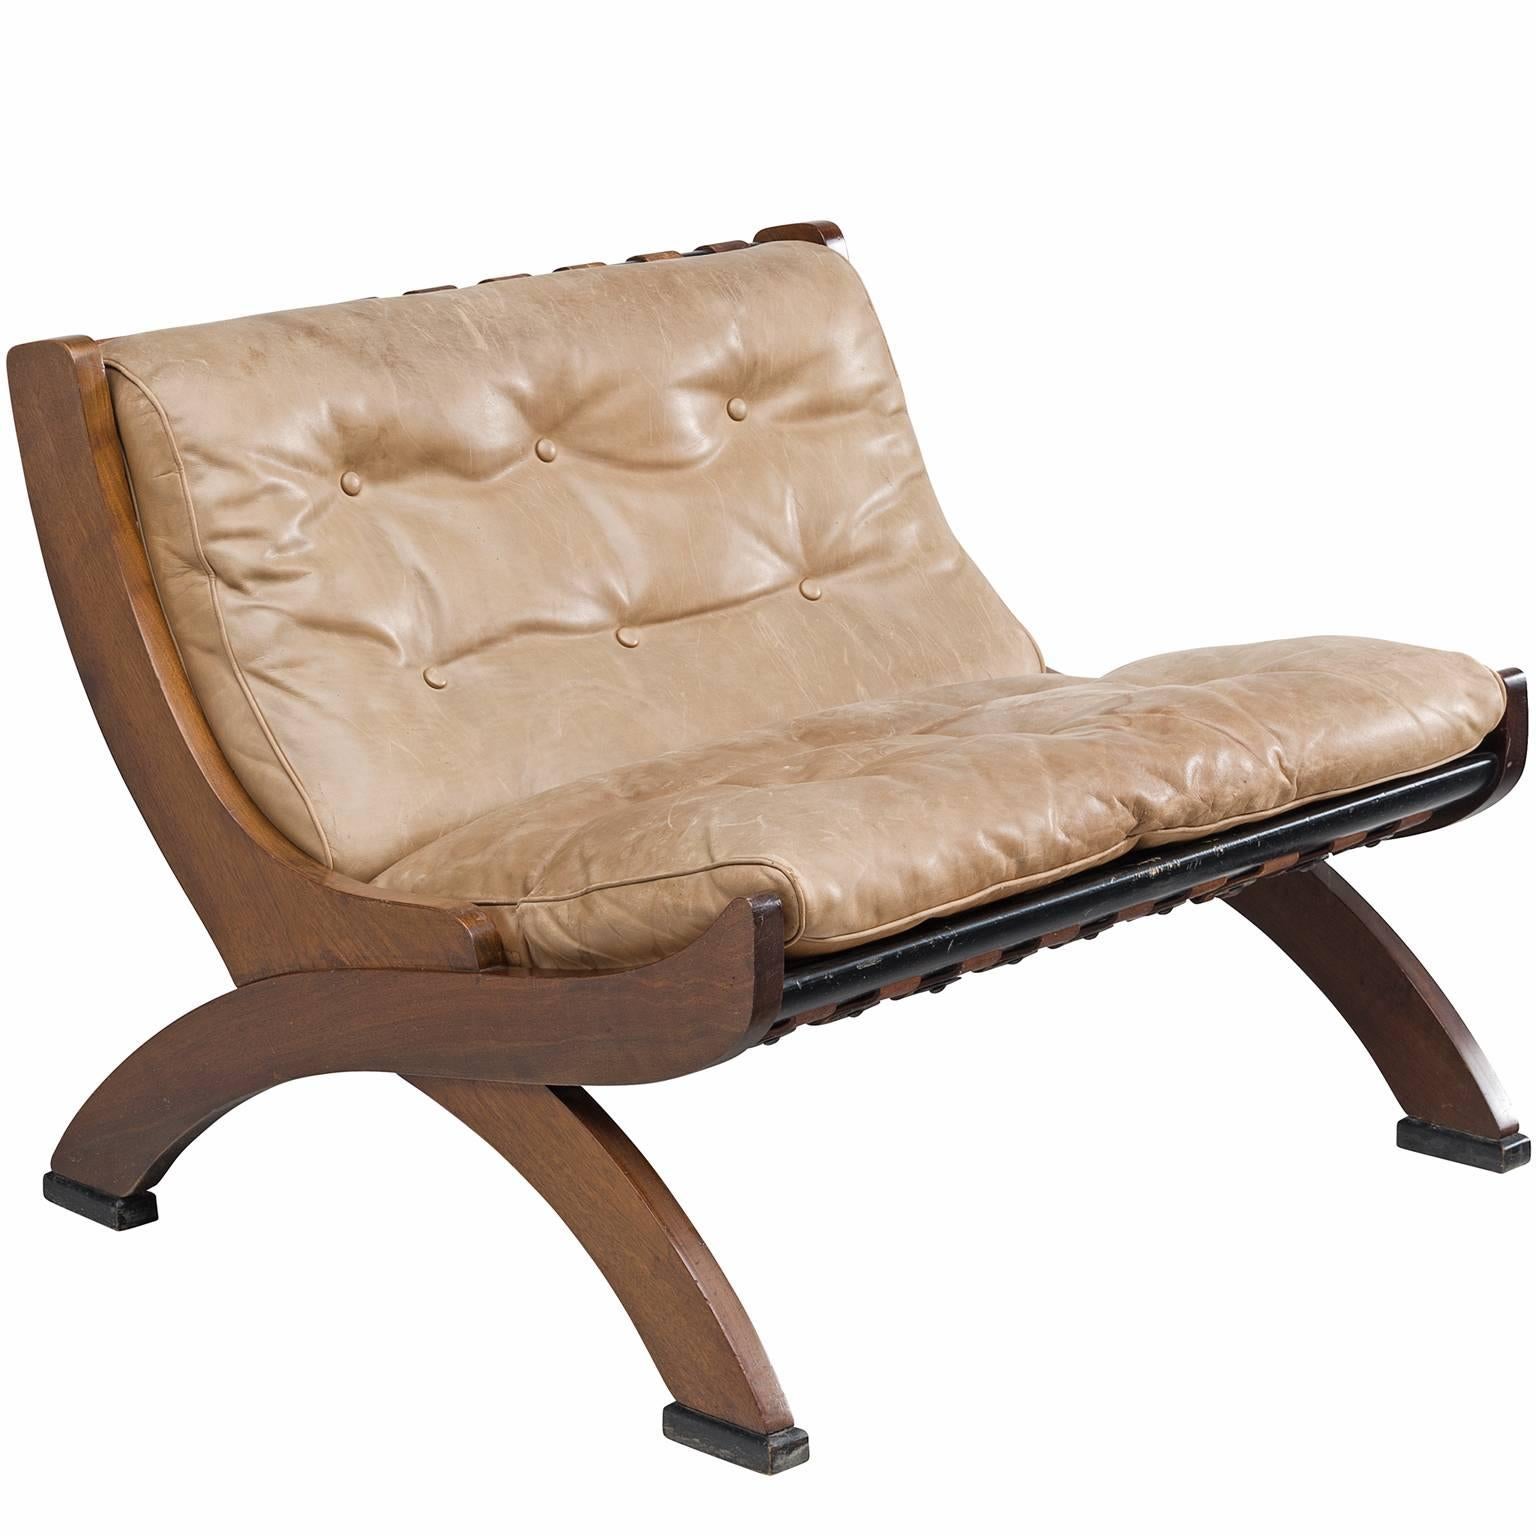 M. Comolli Lounge Chair in Walnut and a Light Brown Leather